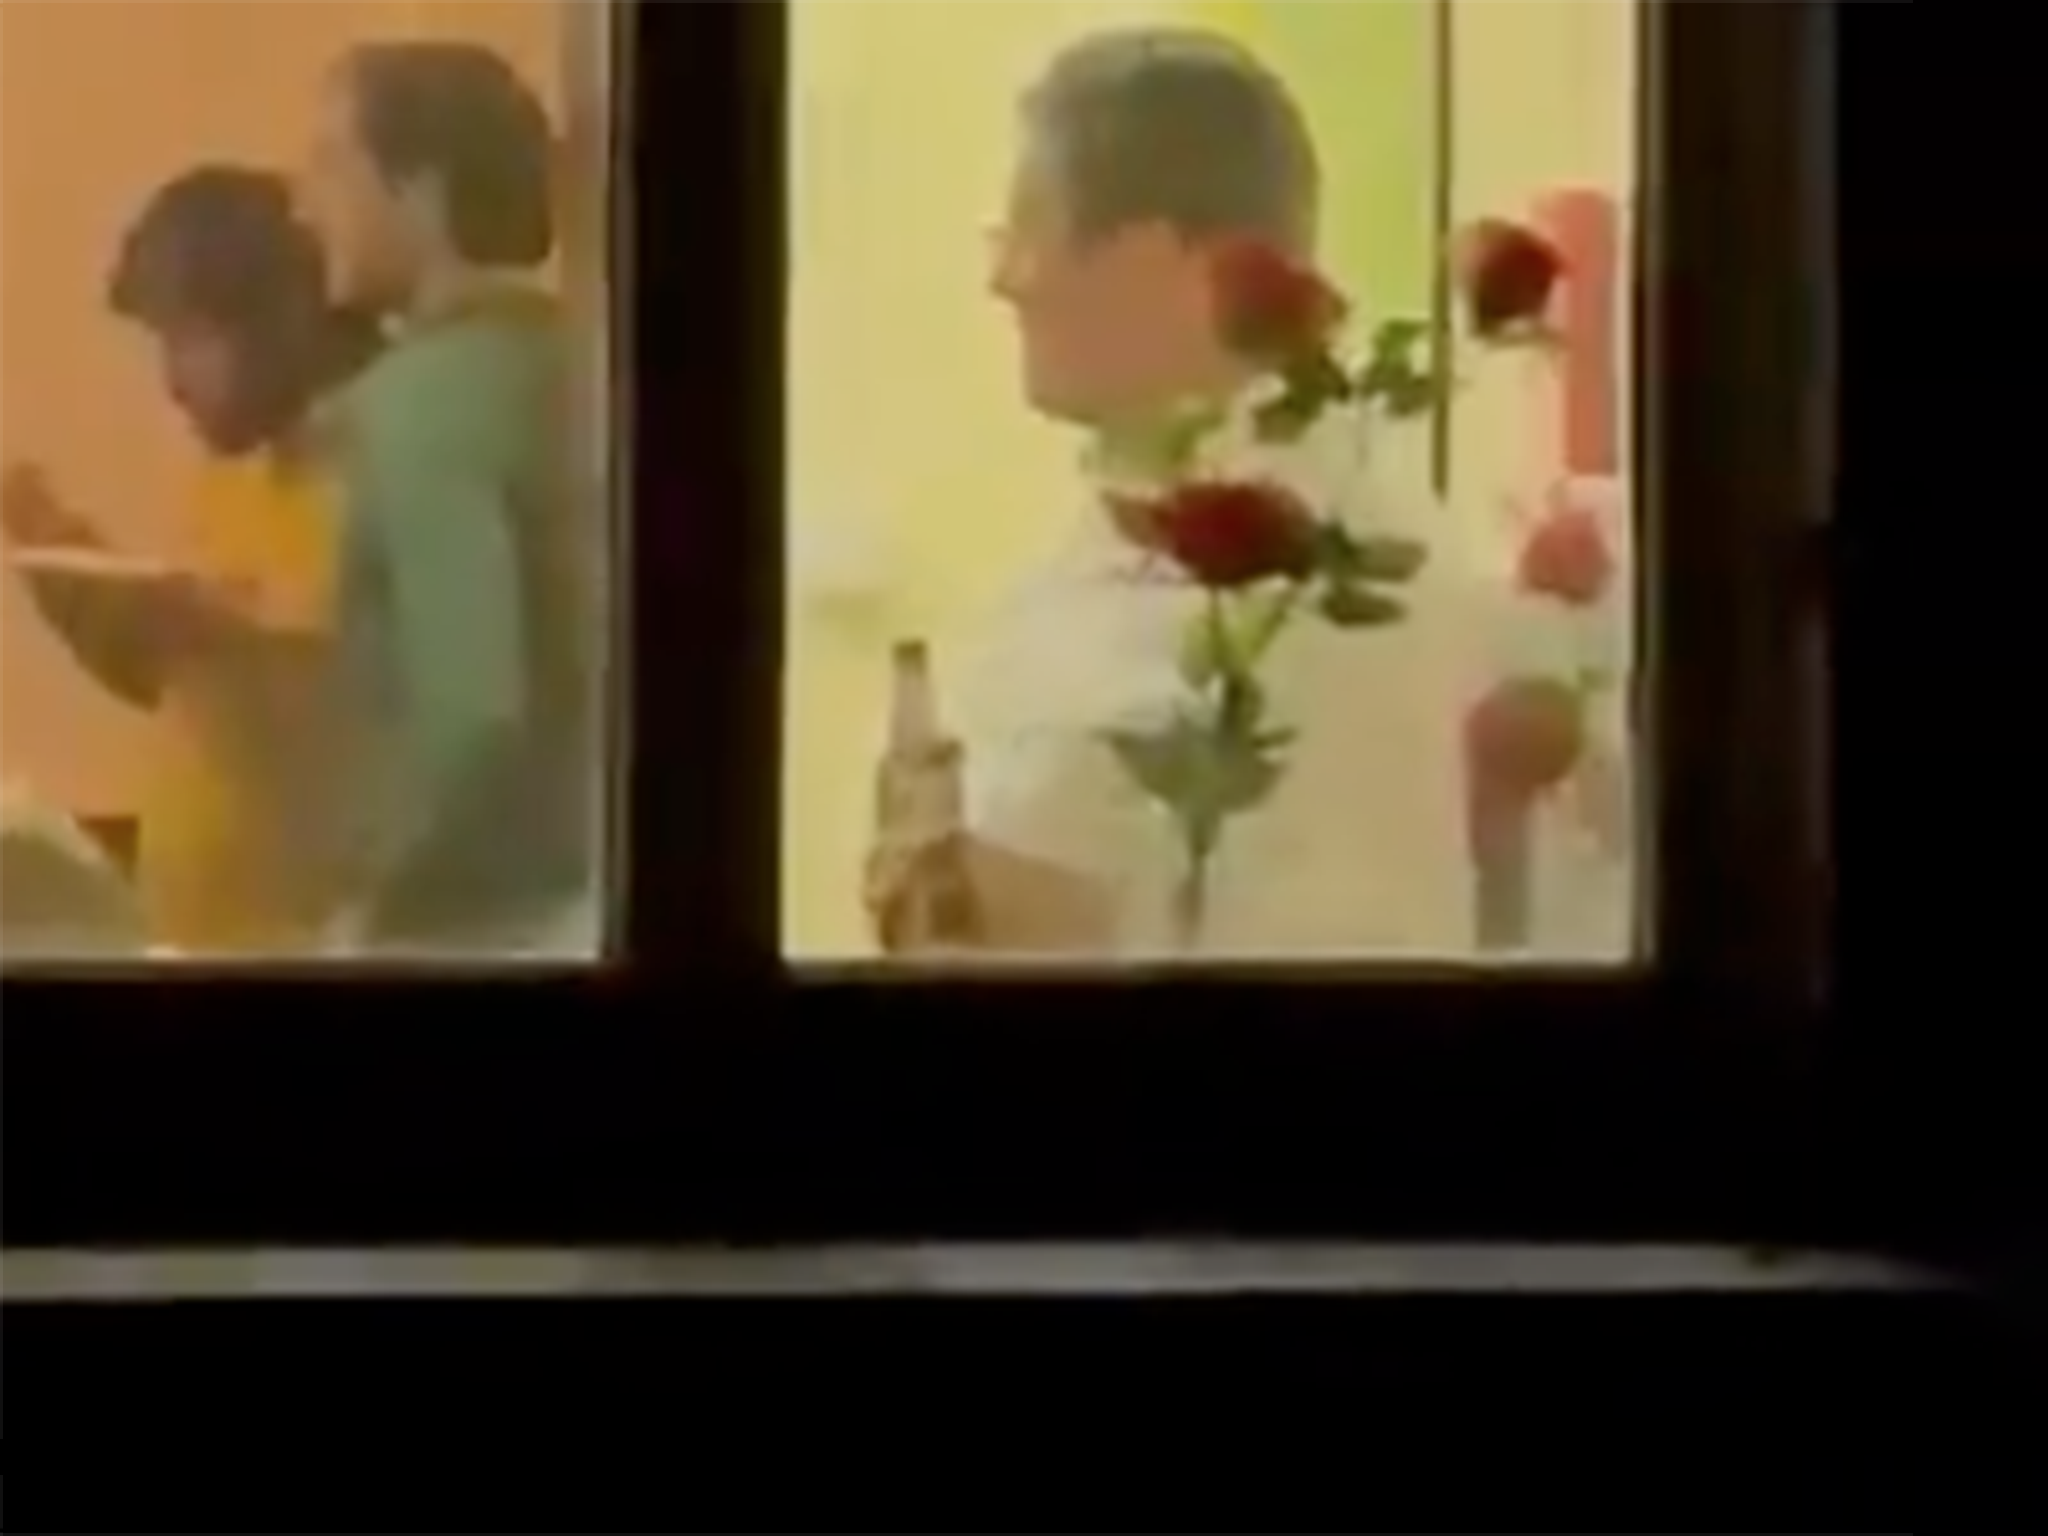 The footage of Sir Keir was captured through a window during the Labour leader’s visit to Durham last year